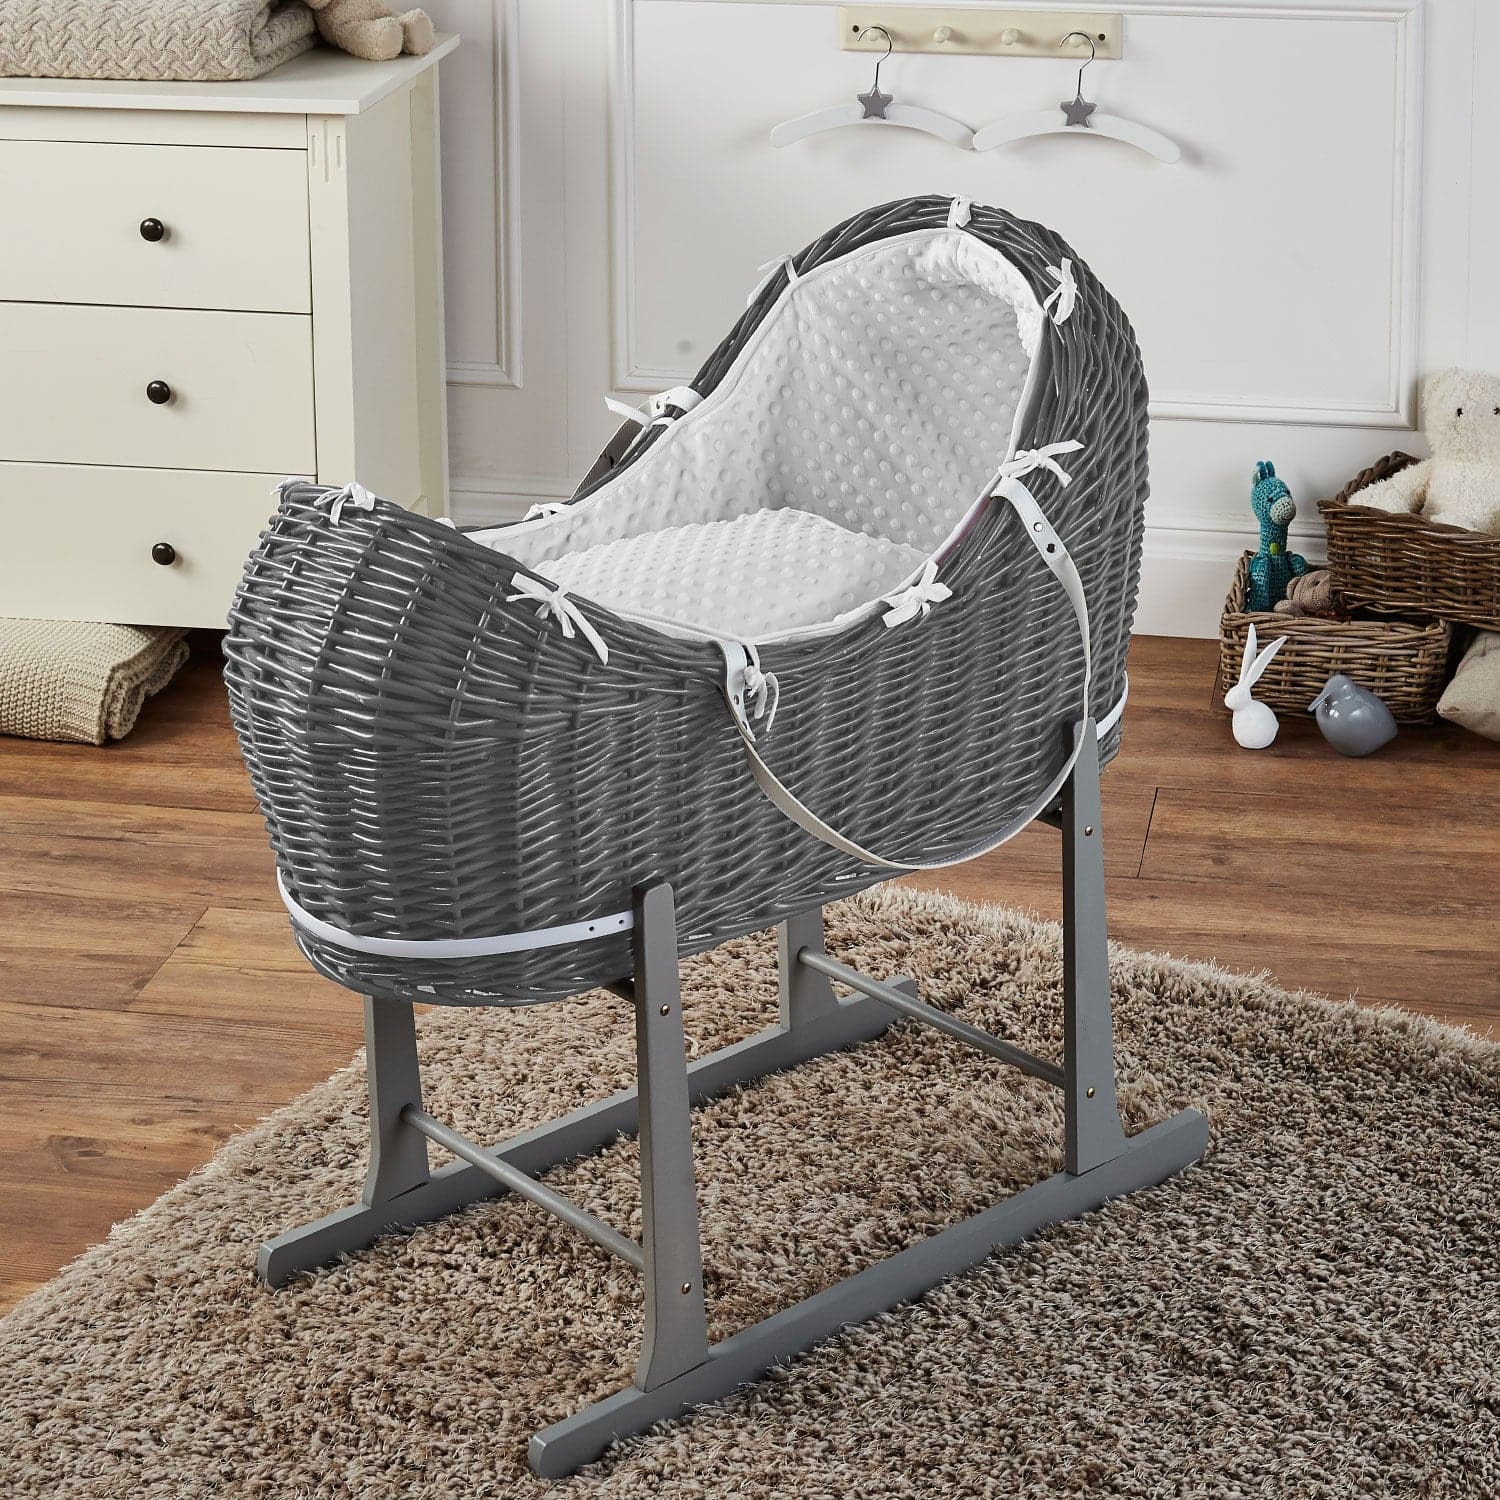 Wicker Deluxe Pod Baby Moses Basket With Stand - Grey / Dimple / White | For Your Little One